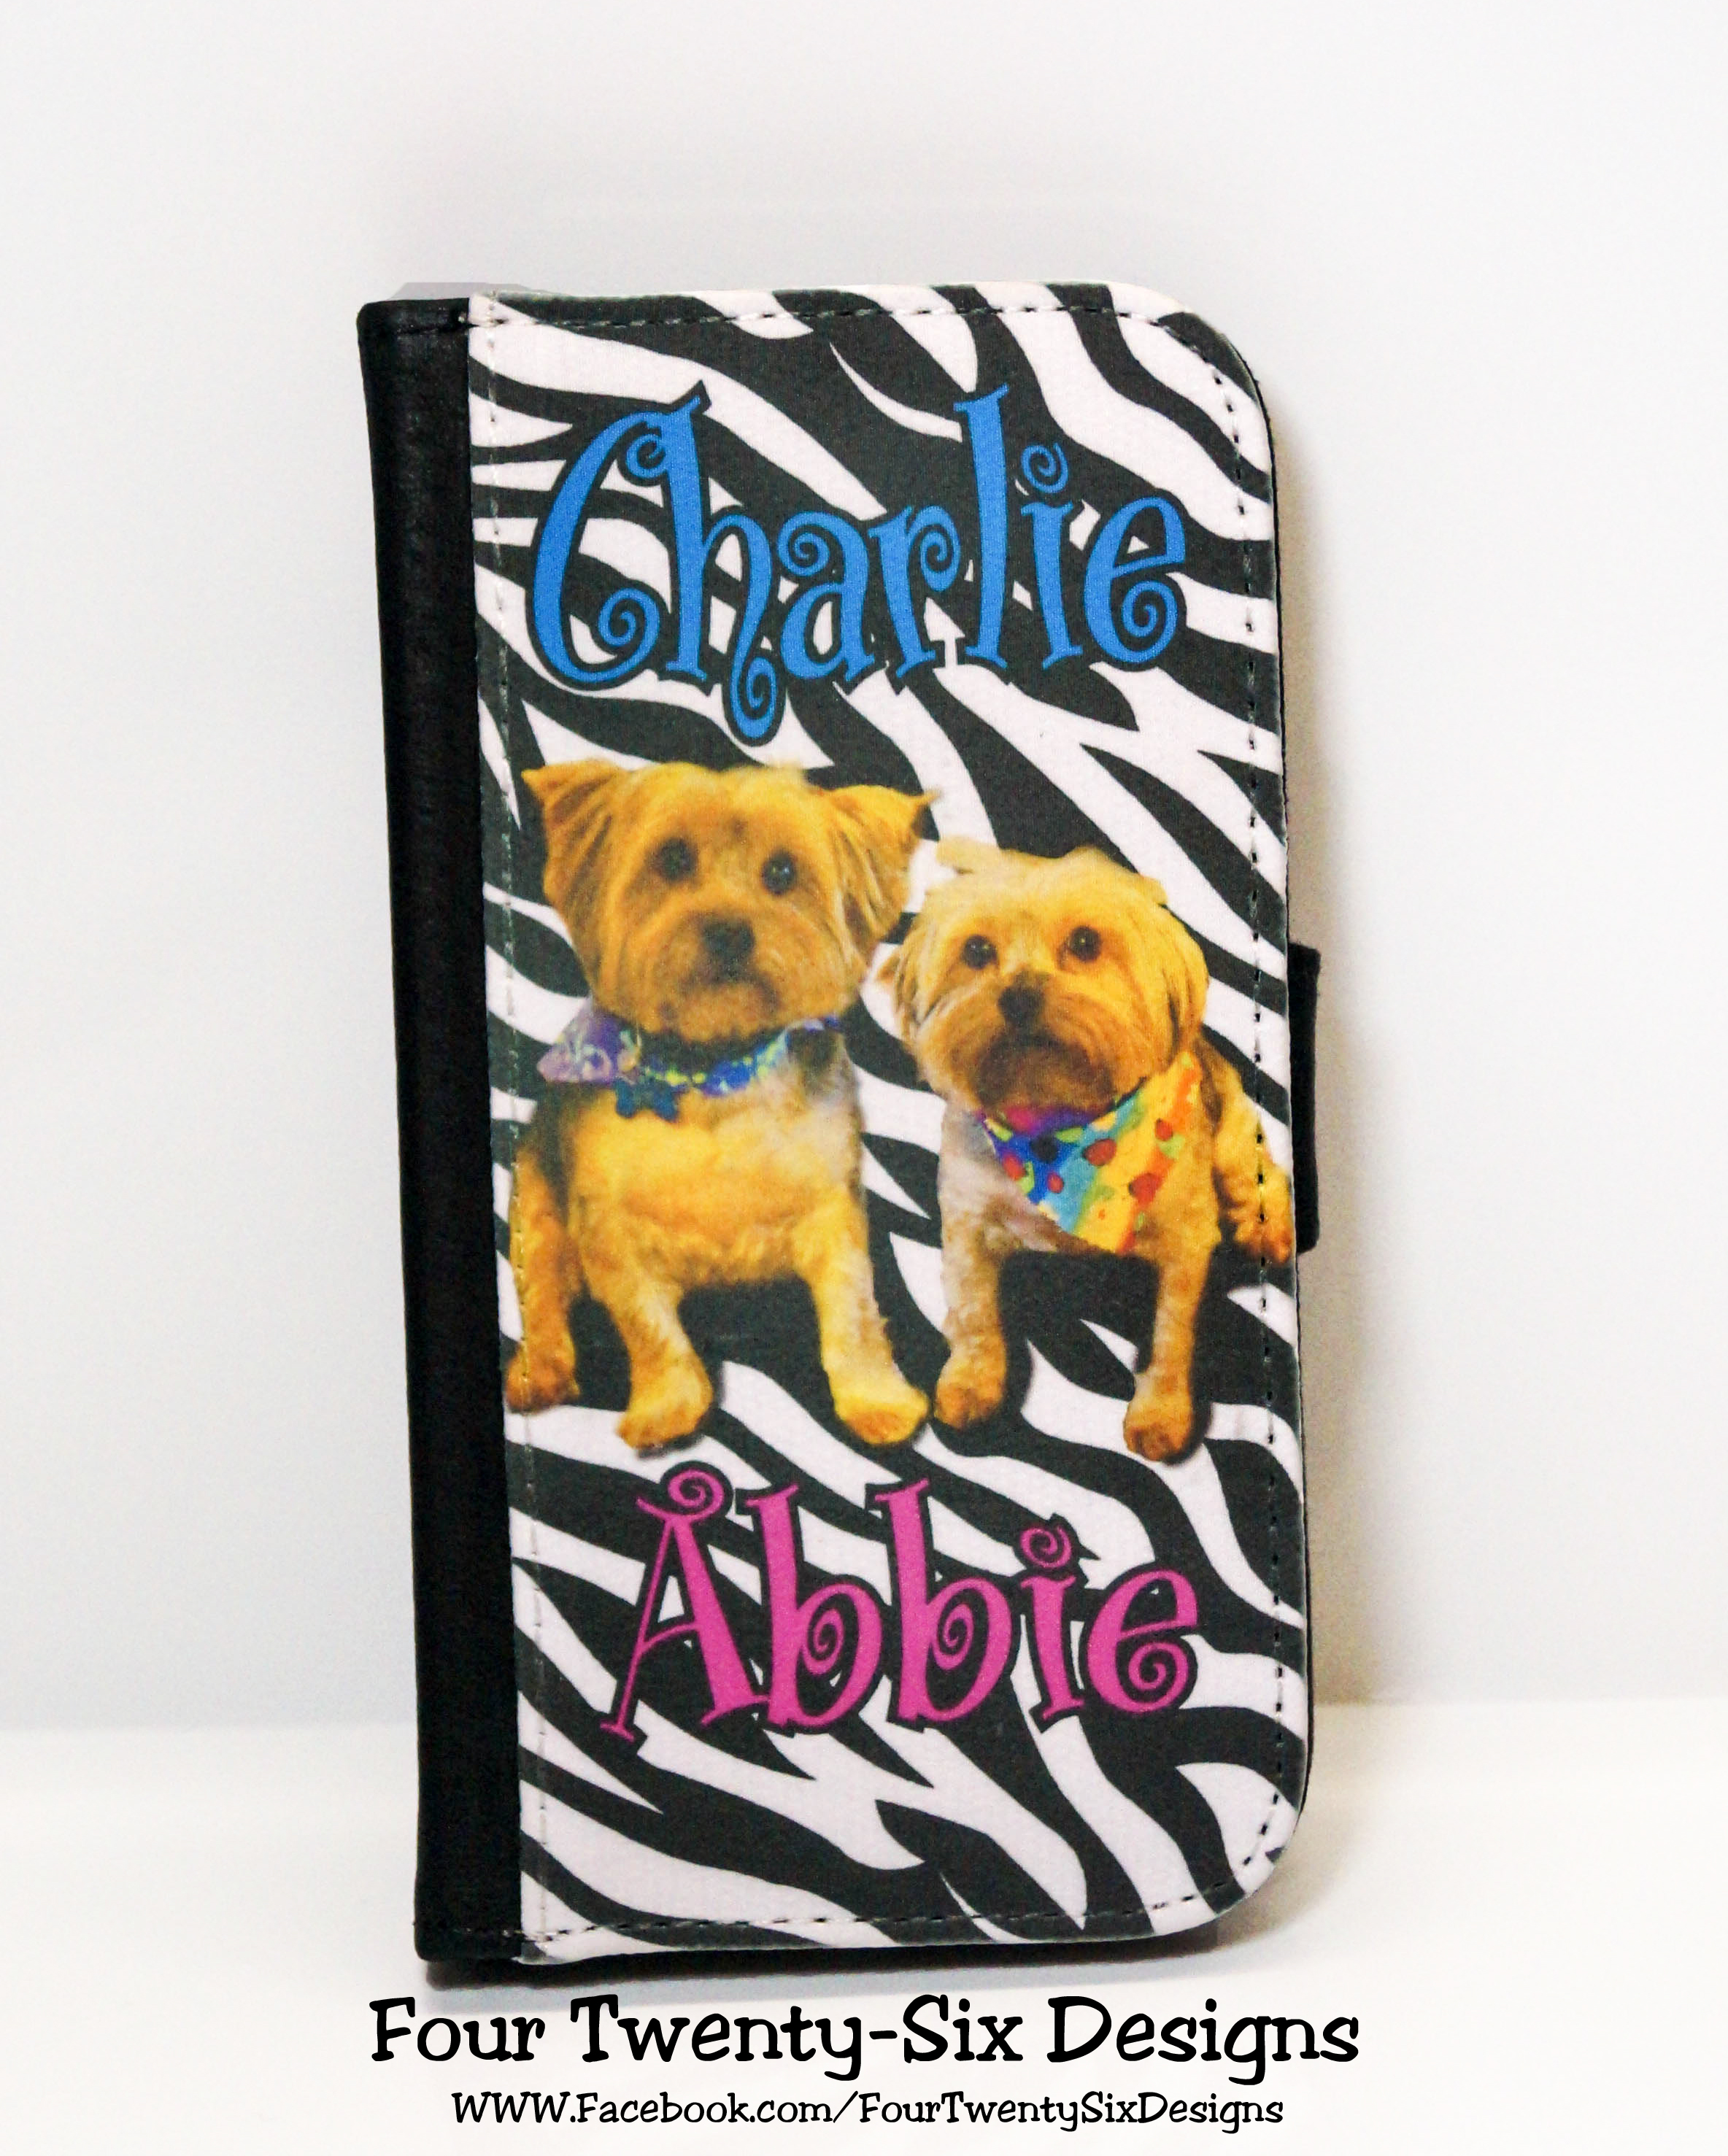 Pet Theme Product Entry made with sublimation printing